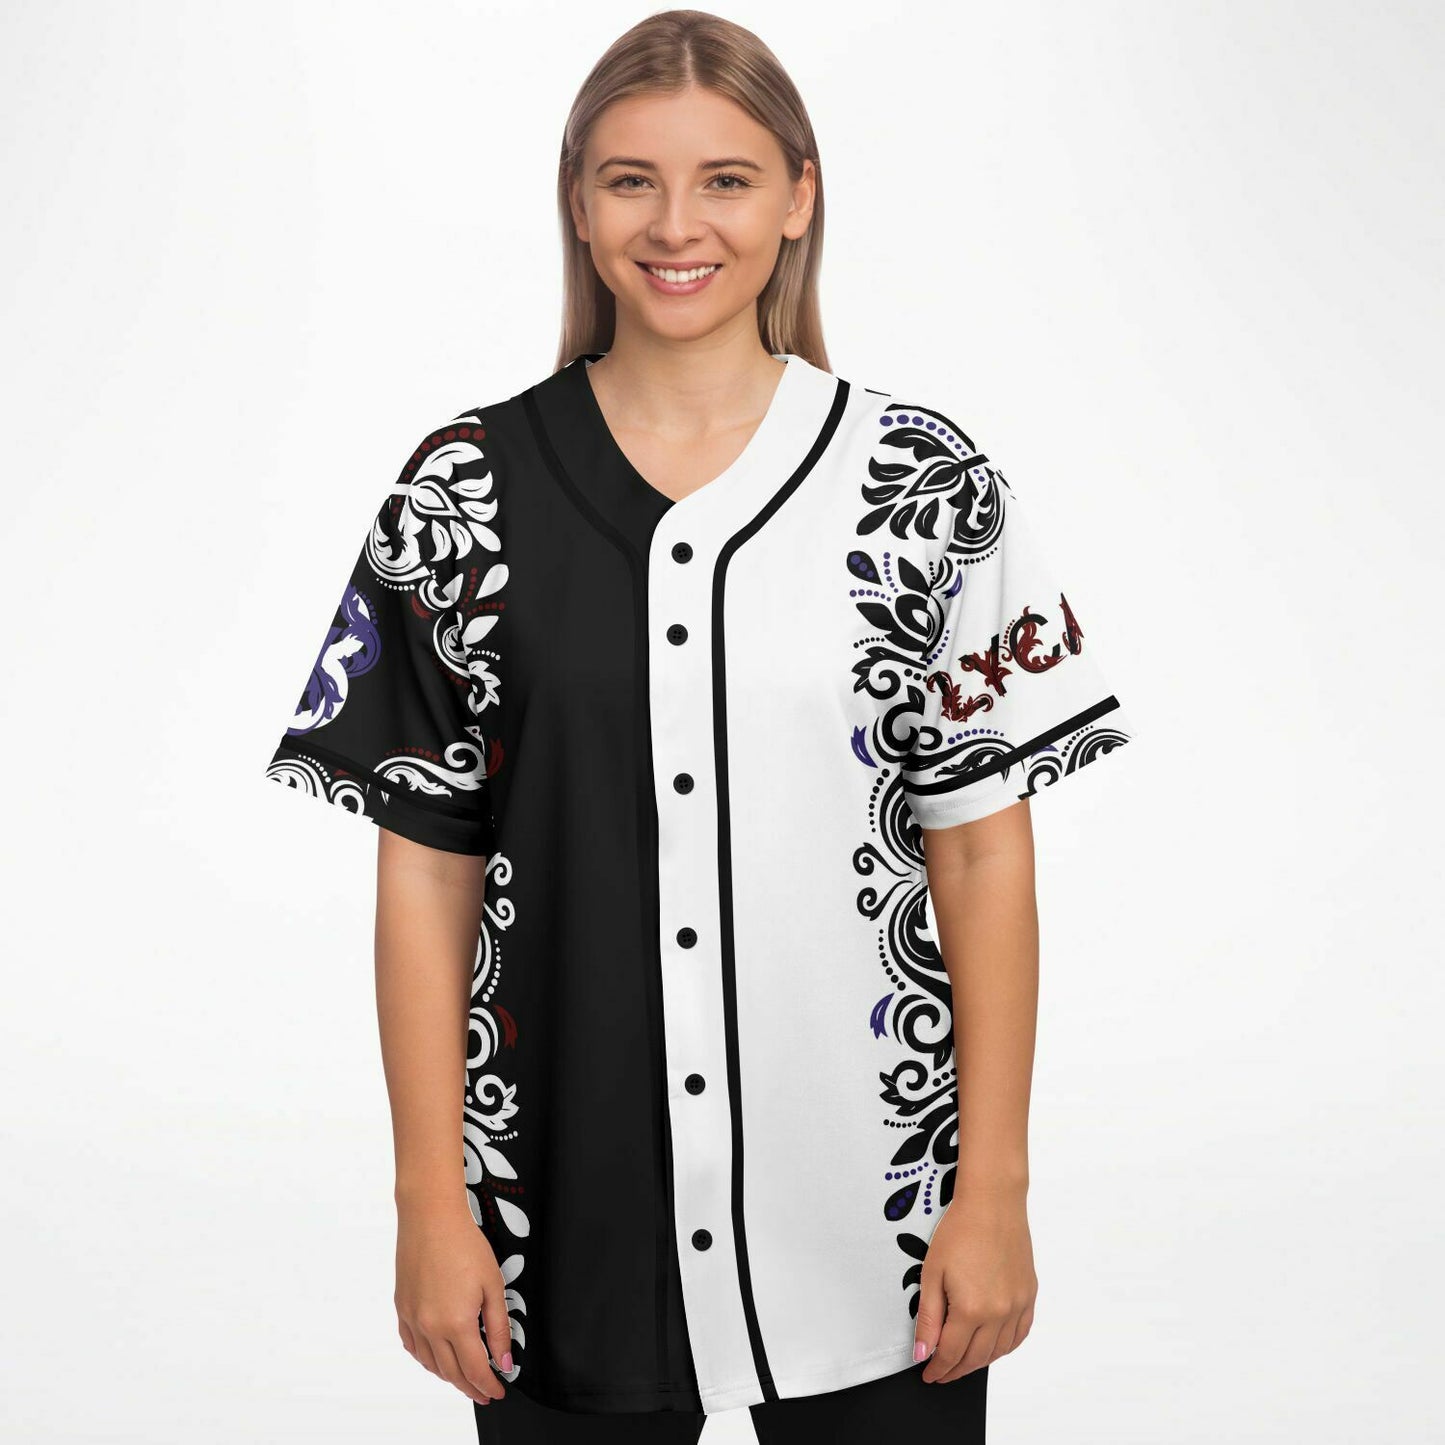 LYCANIS HOWLING RORSCHACH JERSEY